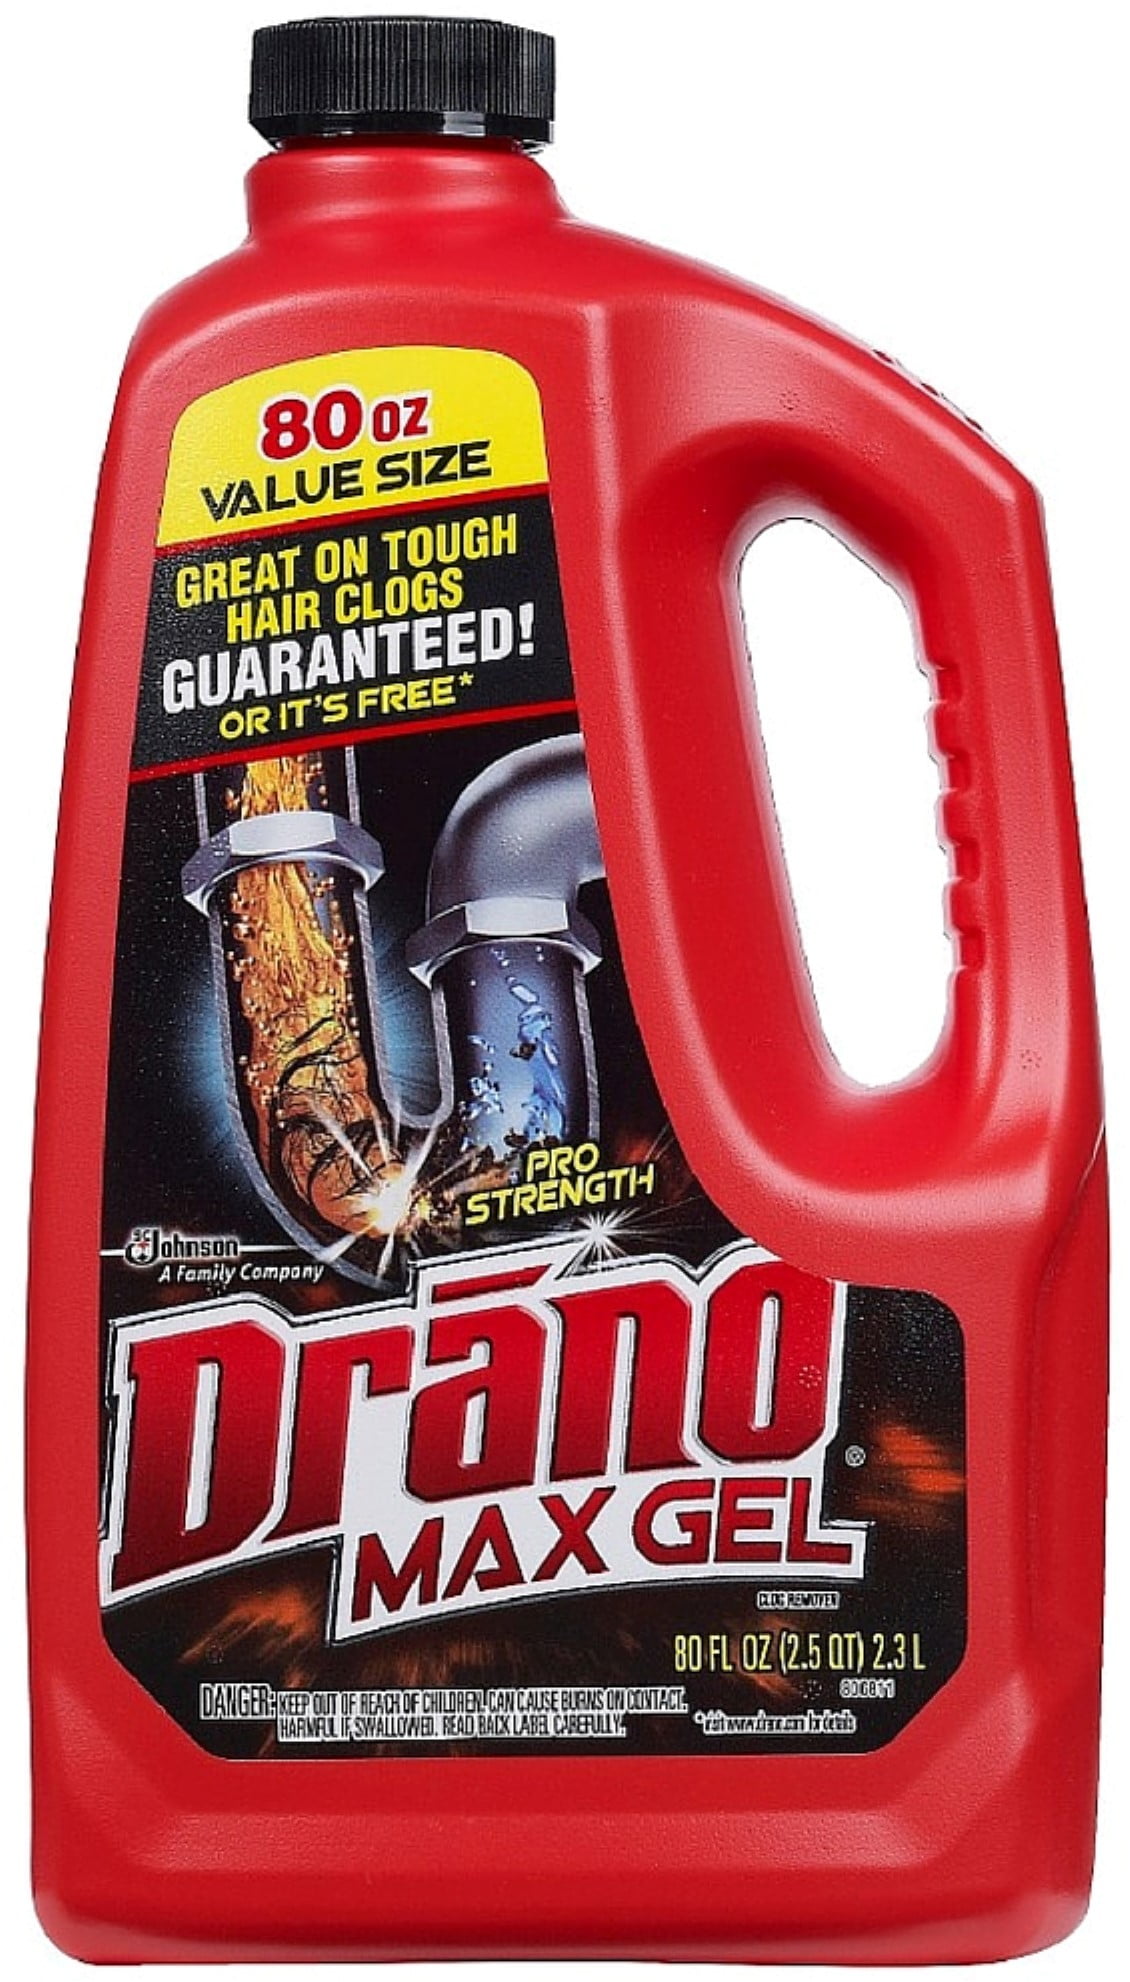 buy-drano-max-gel-liquid-clog-remover-80-oz-pack-of-2-online-at-lowest